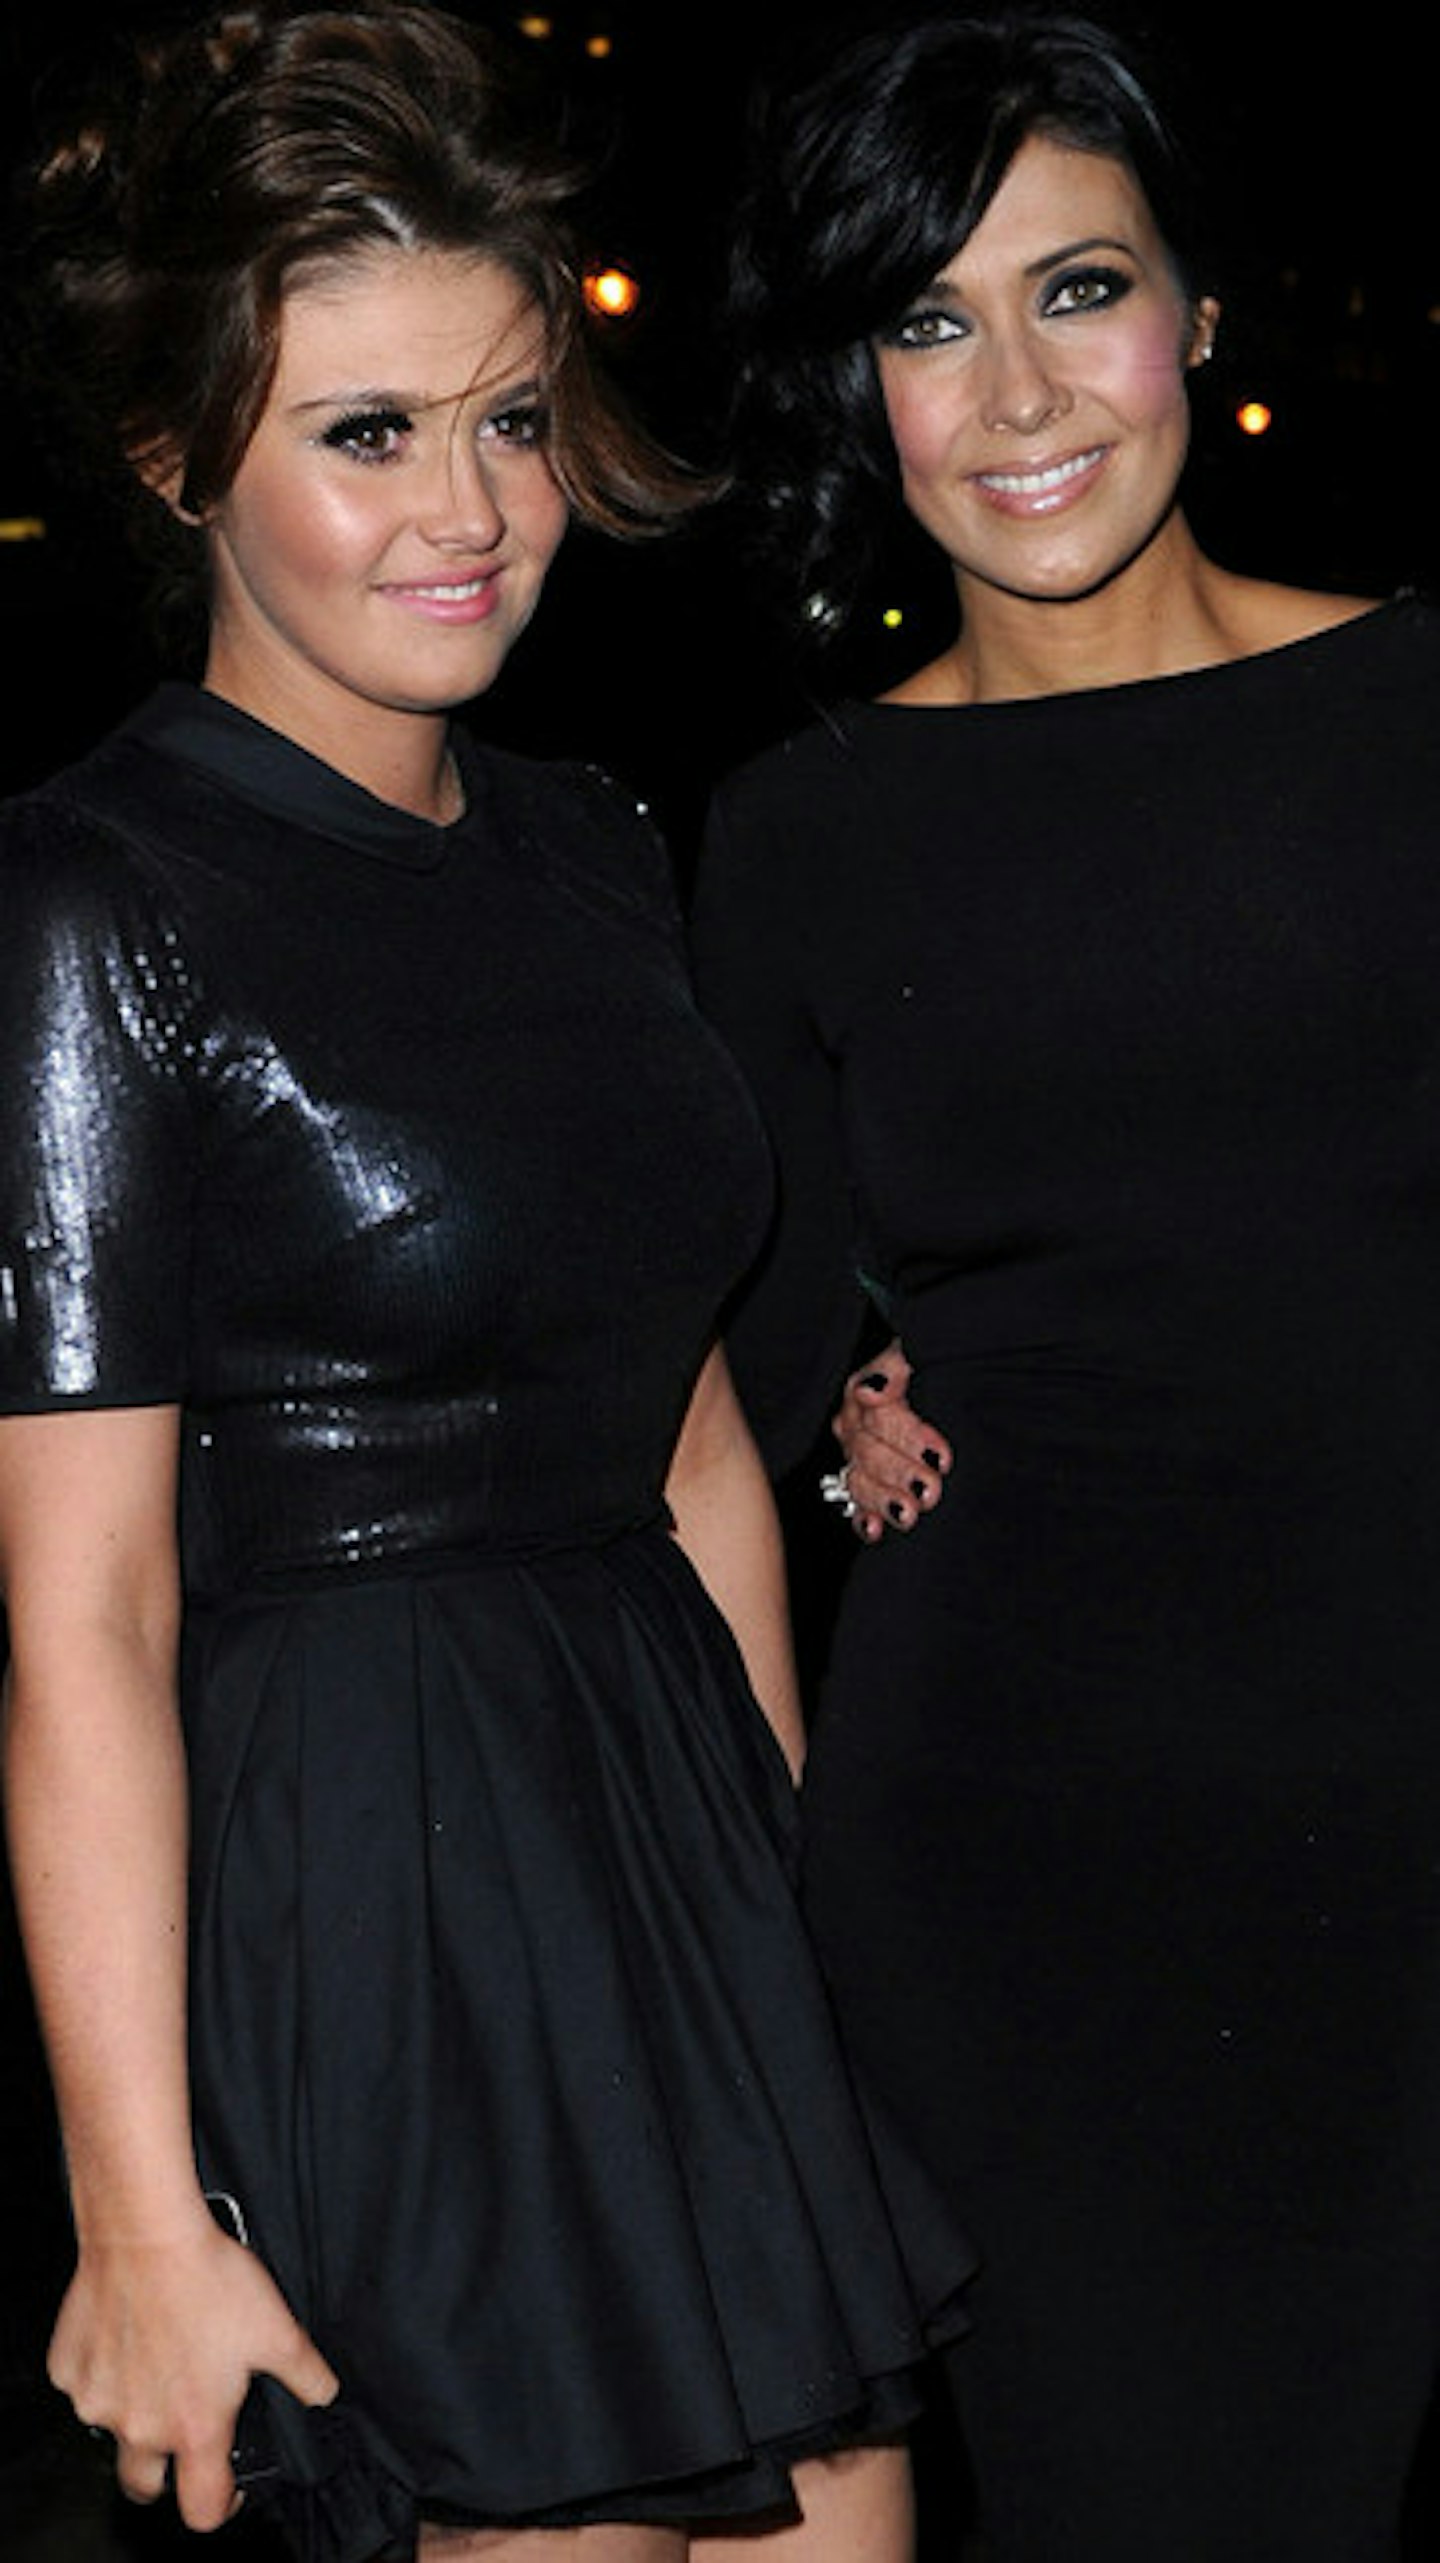 Kym and her daughter in 2012